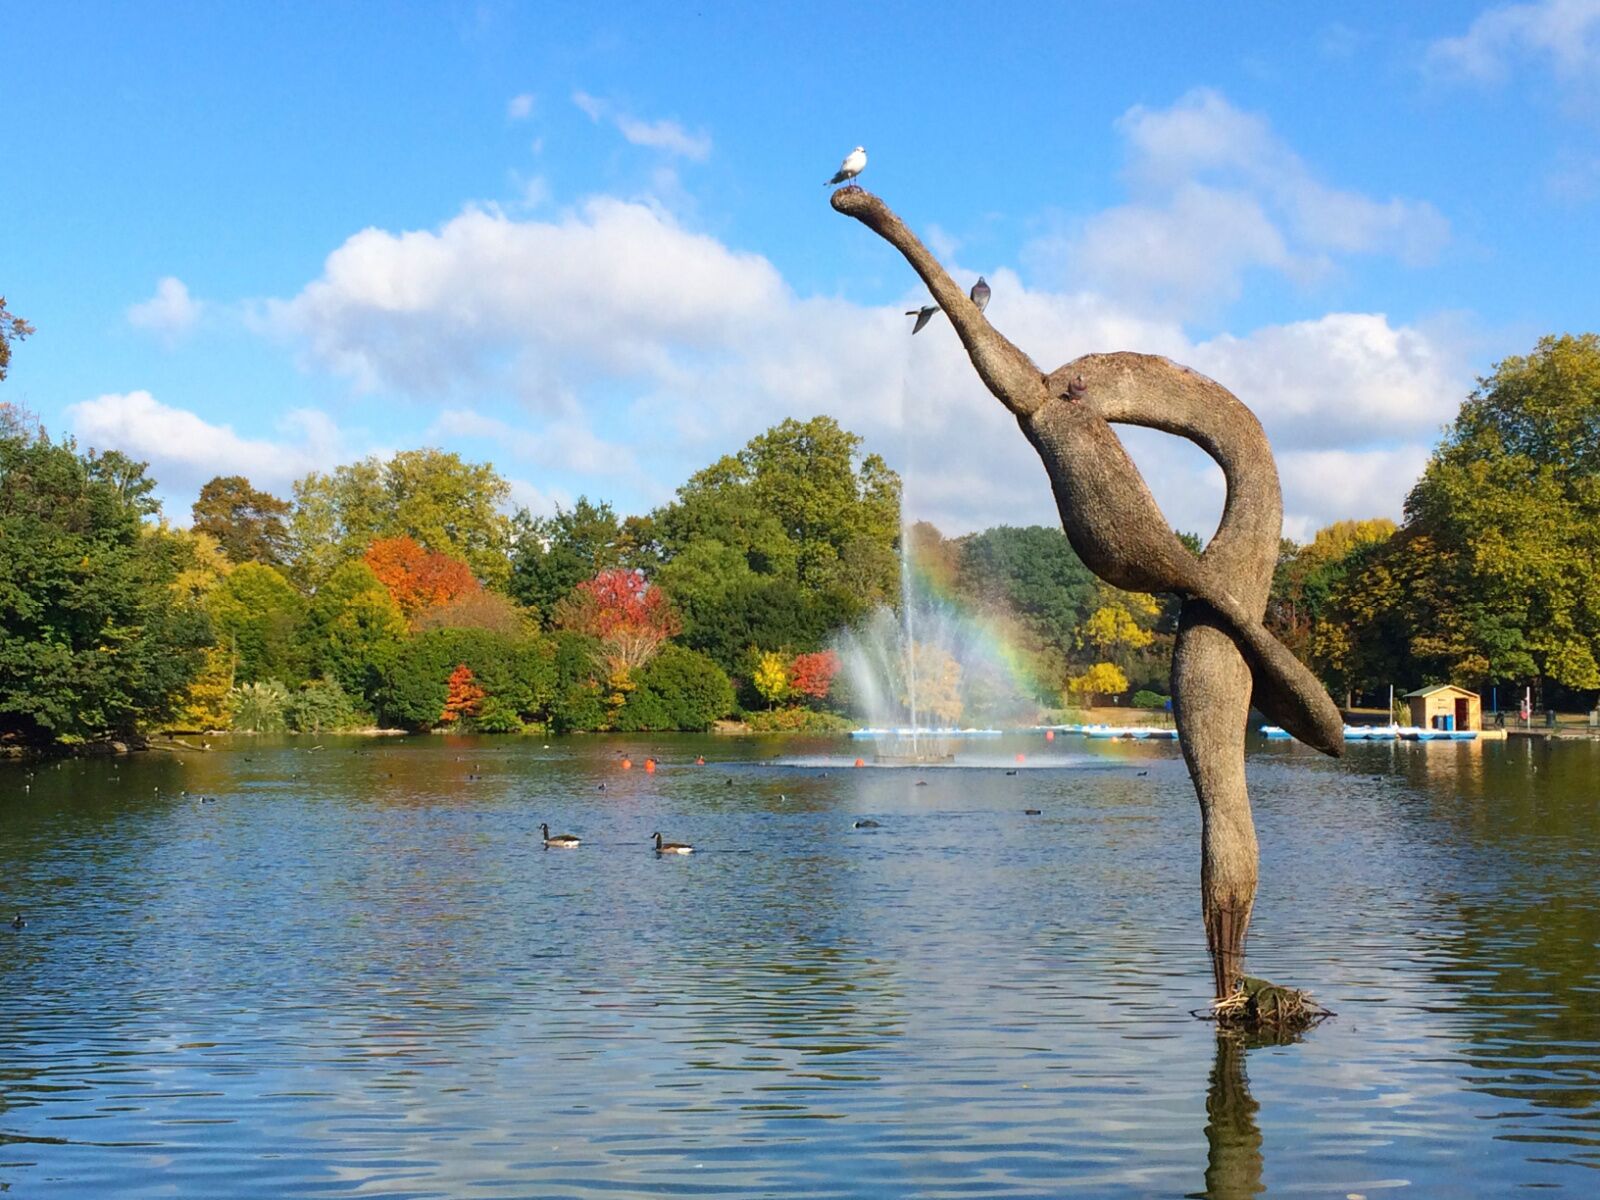 parks in london - statue on pond